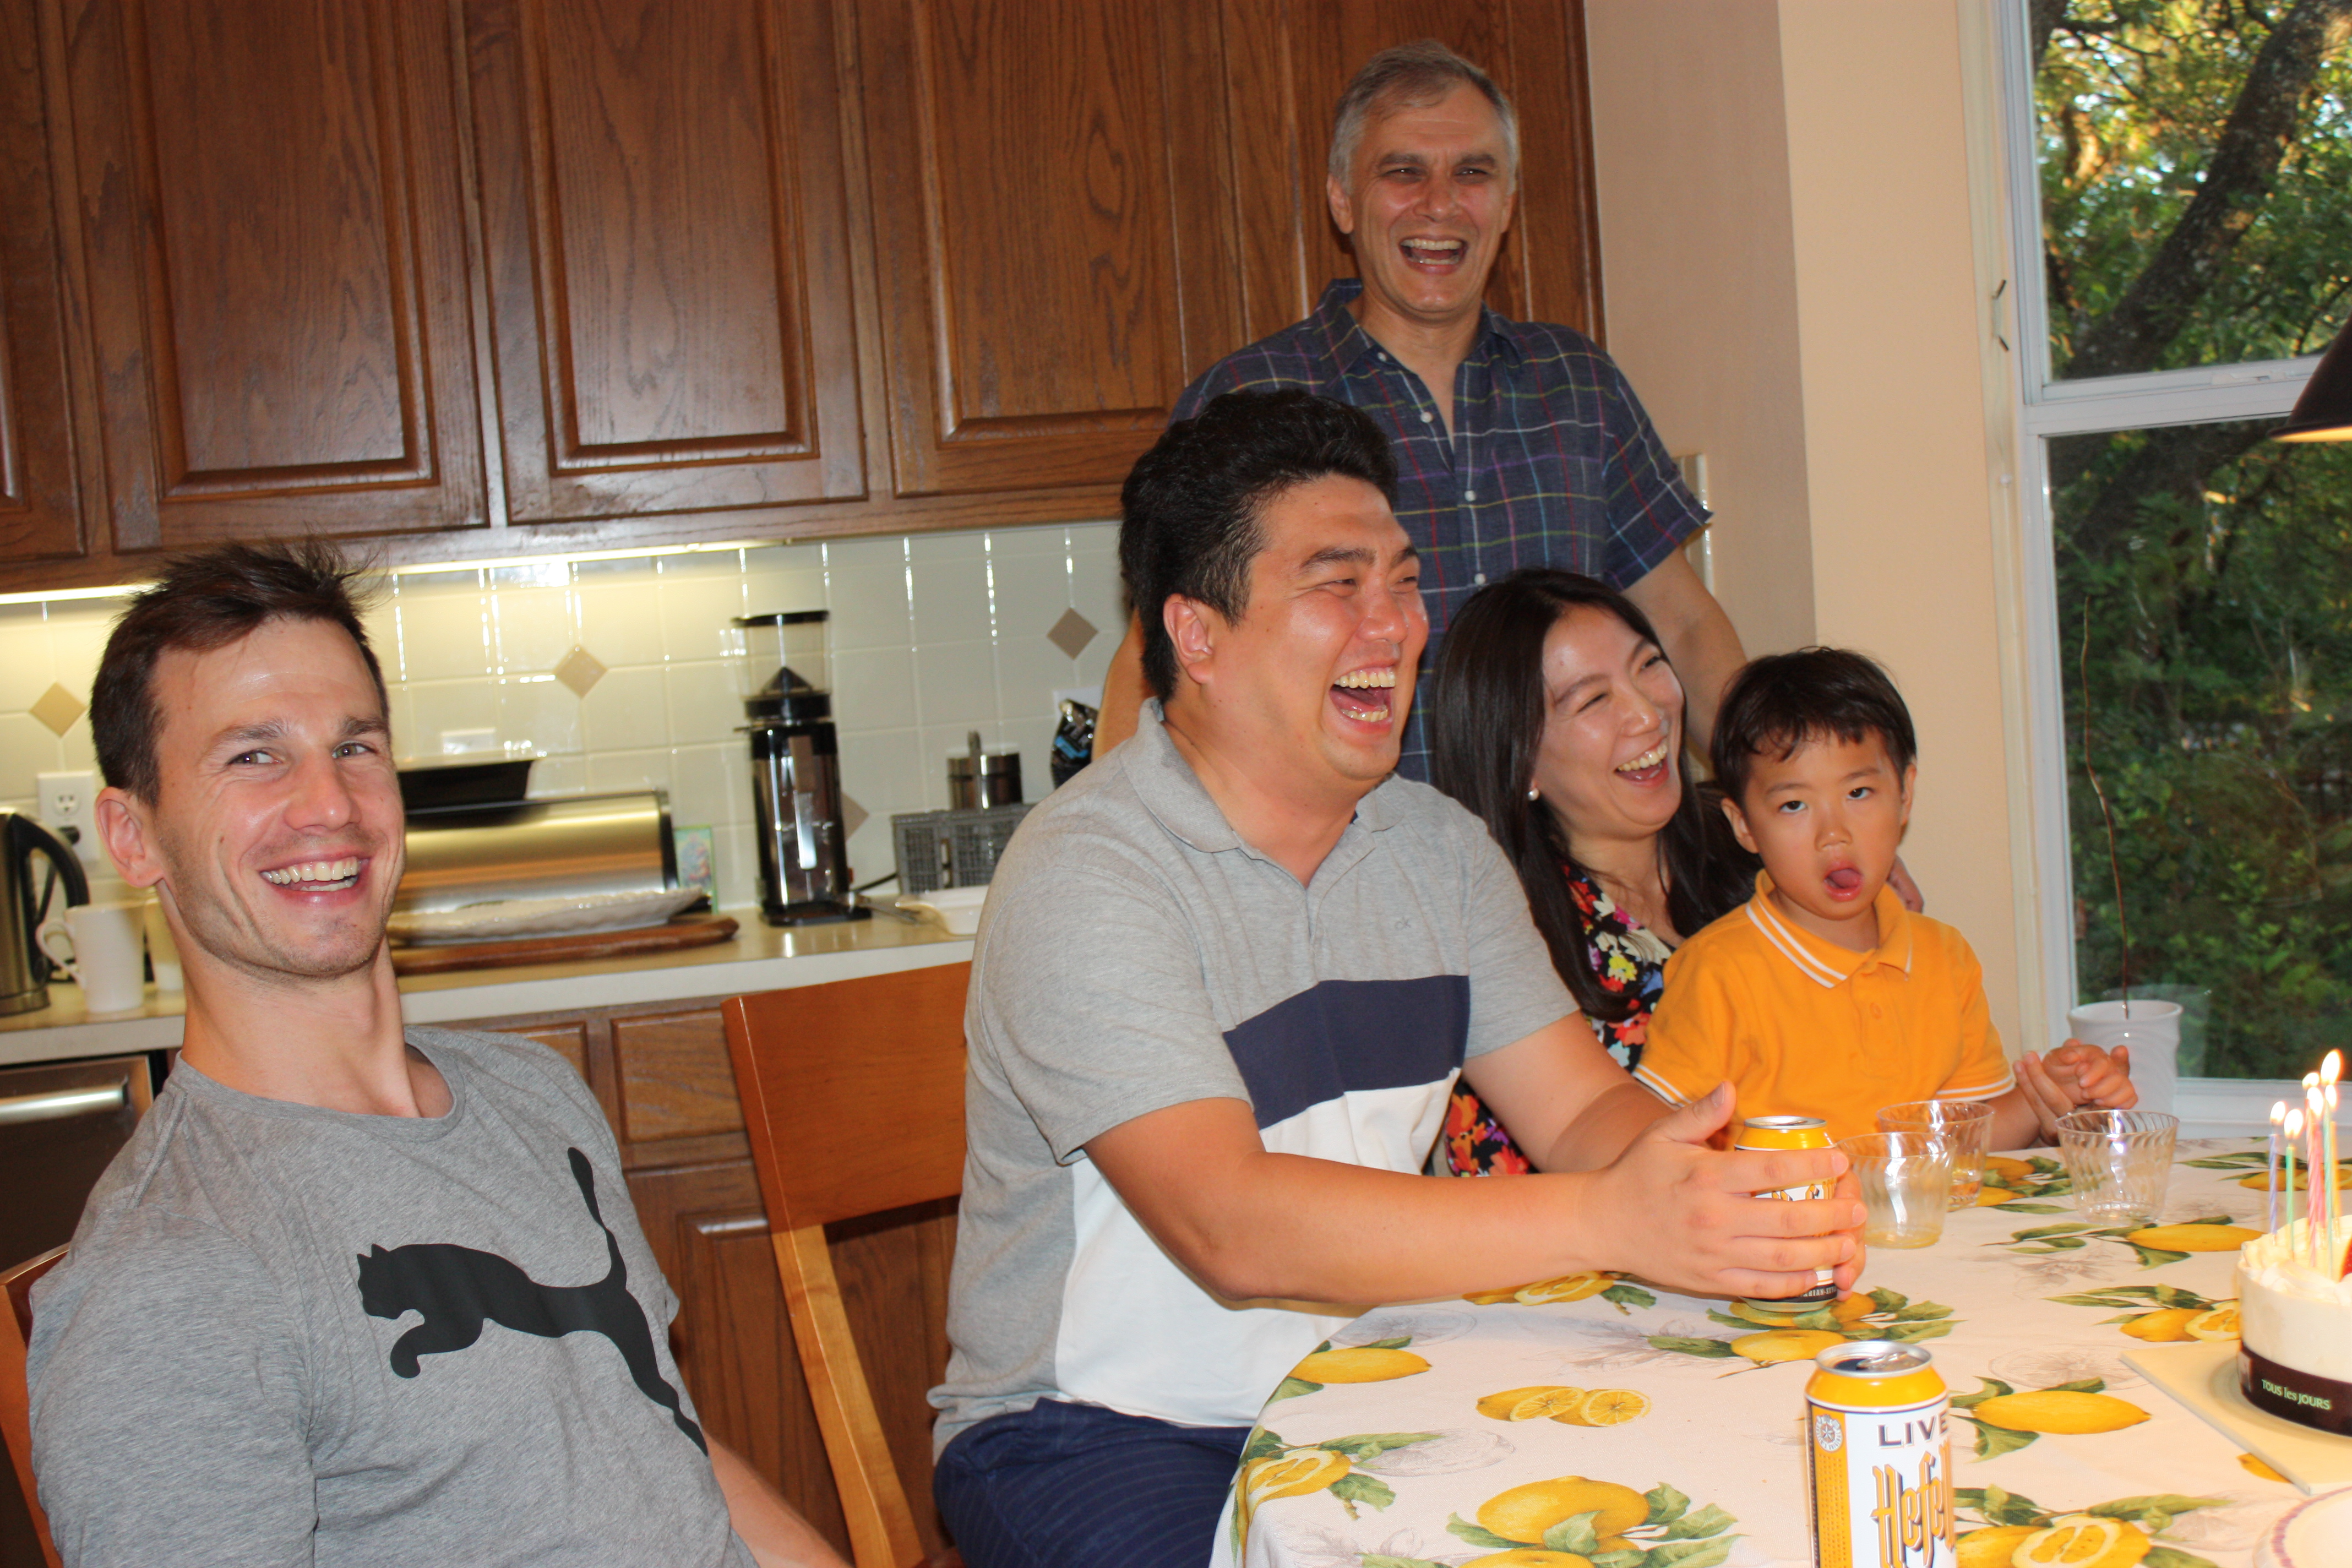 Donghan, his family, Tobi, and Alex laughing.